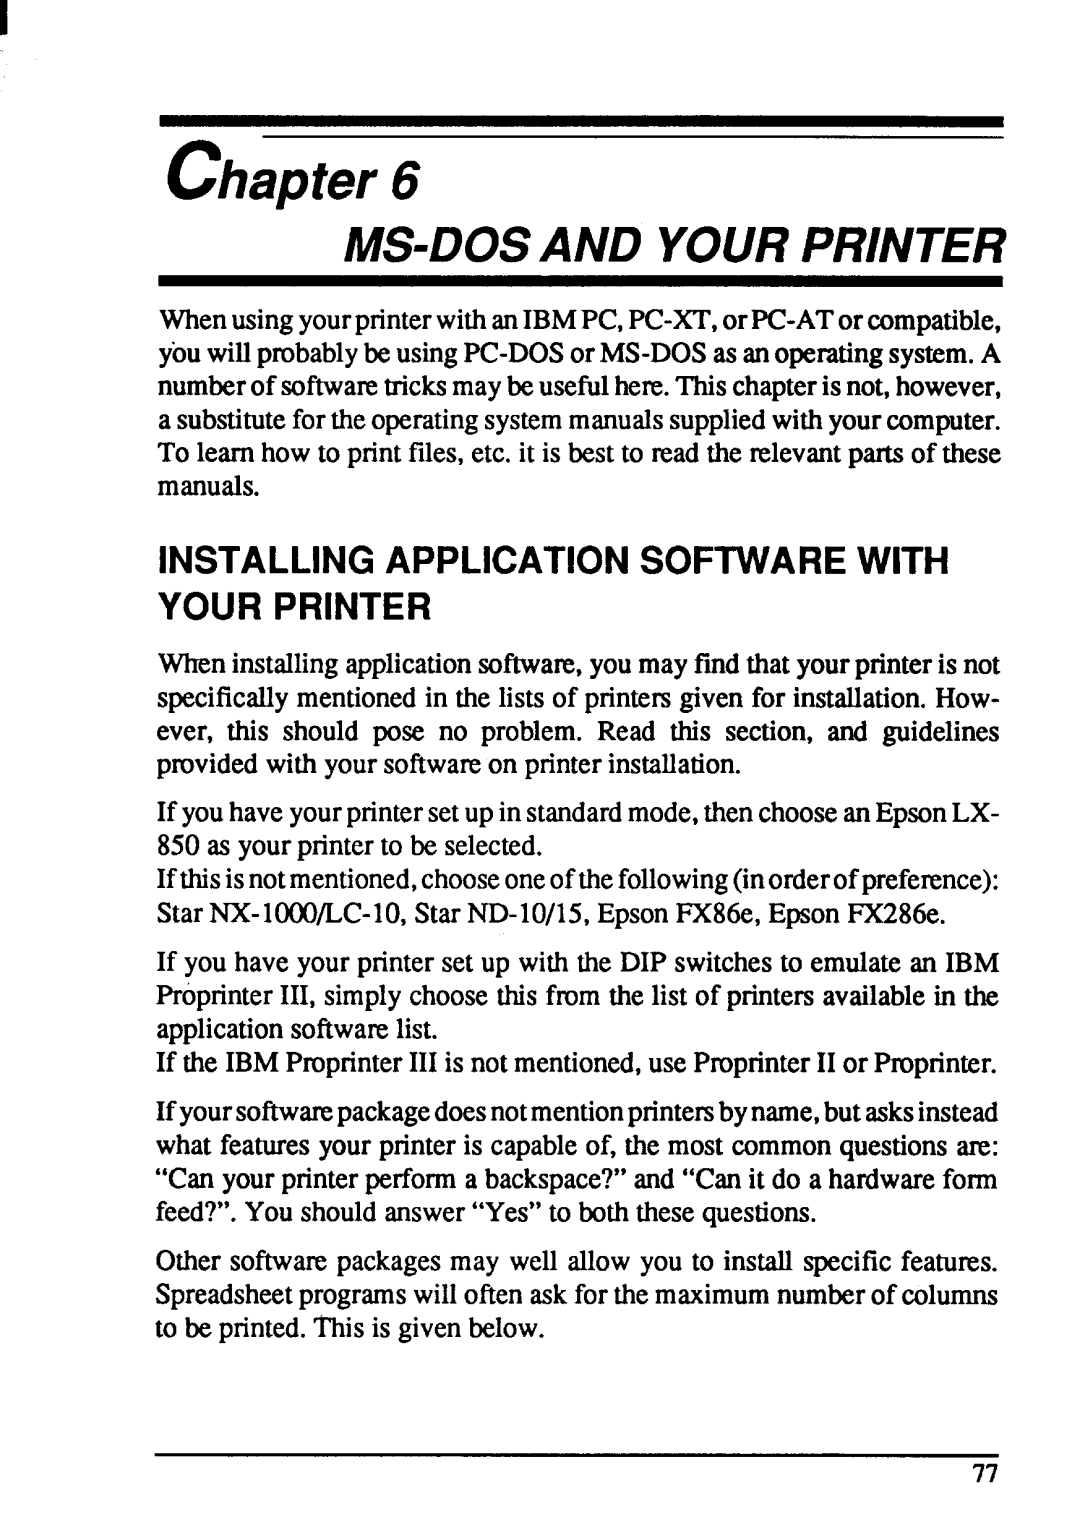 Star Micronics NX-1001 manual M A Y P, Installing Application Software With Your Printer, chapter 